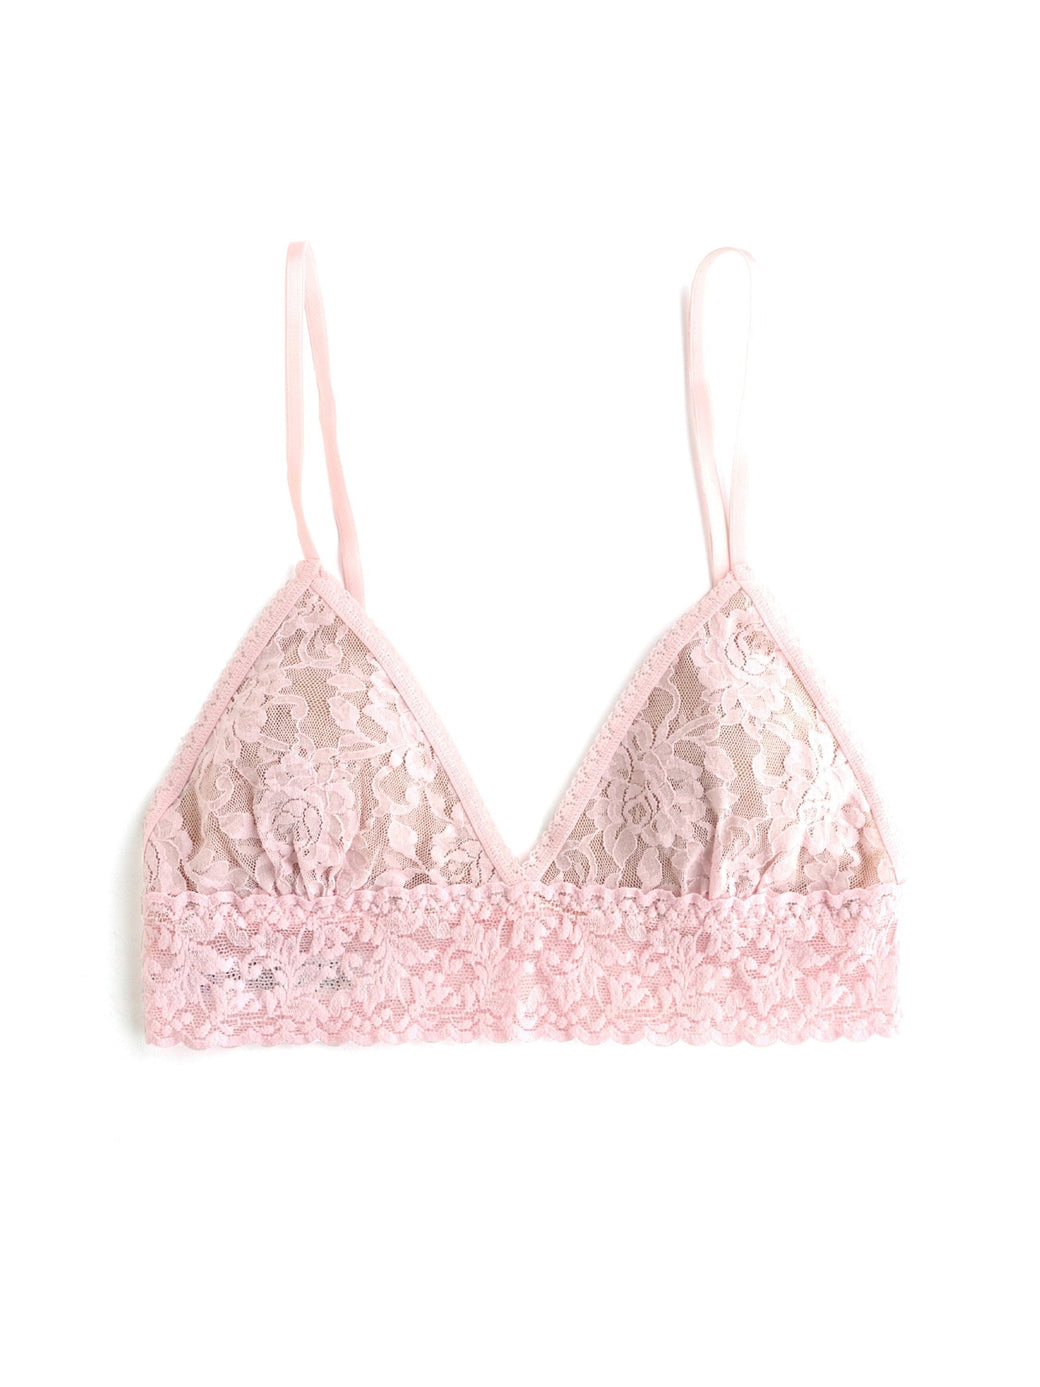 Lace Triangle Bra - hot pink, mustard or lilac - thong available for £3.60